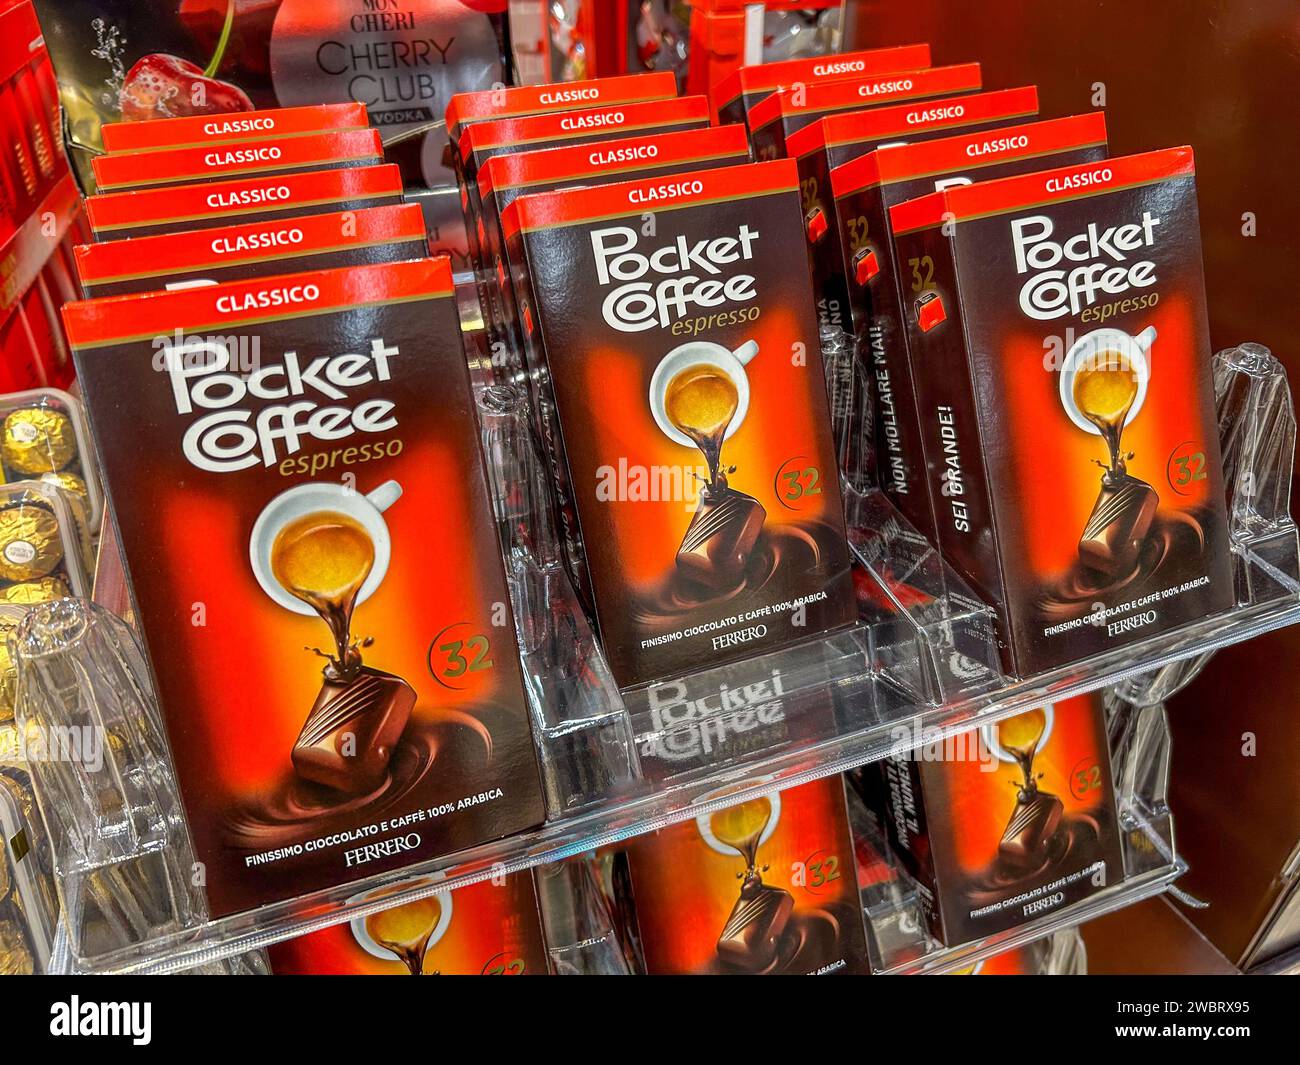 italy - January 12, 2024: Ferrero Pocket Coffee chocolates filled with coffee in packs on display for sale in Italian supermarket Stock Photo